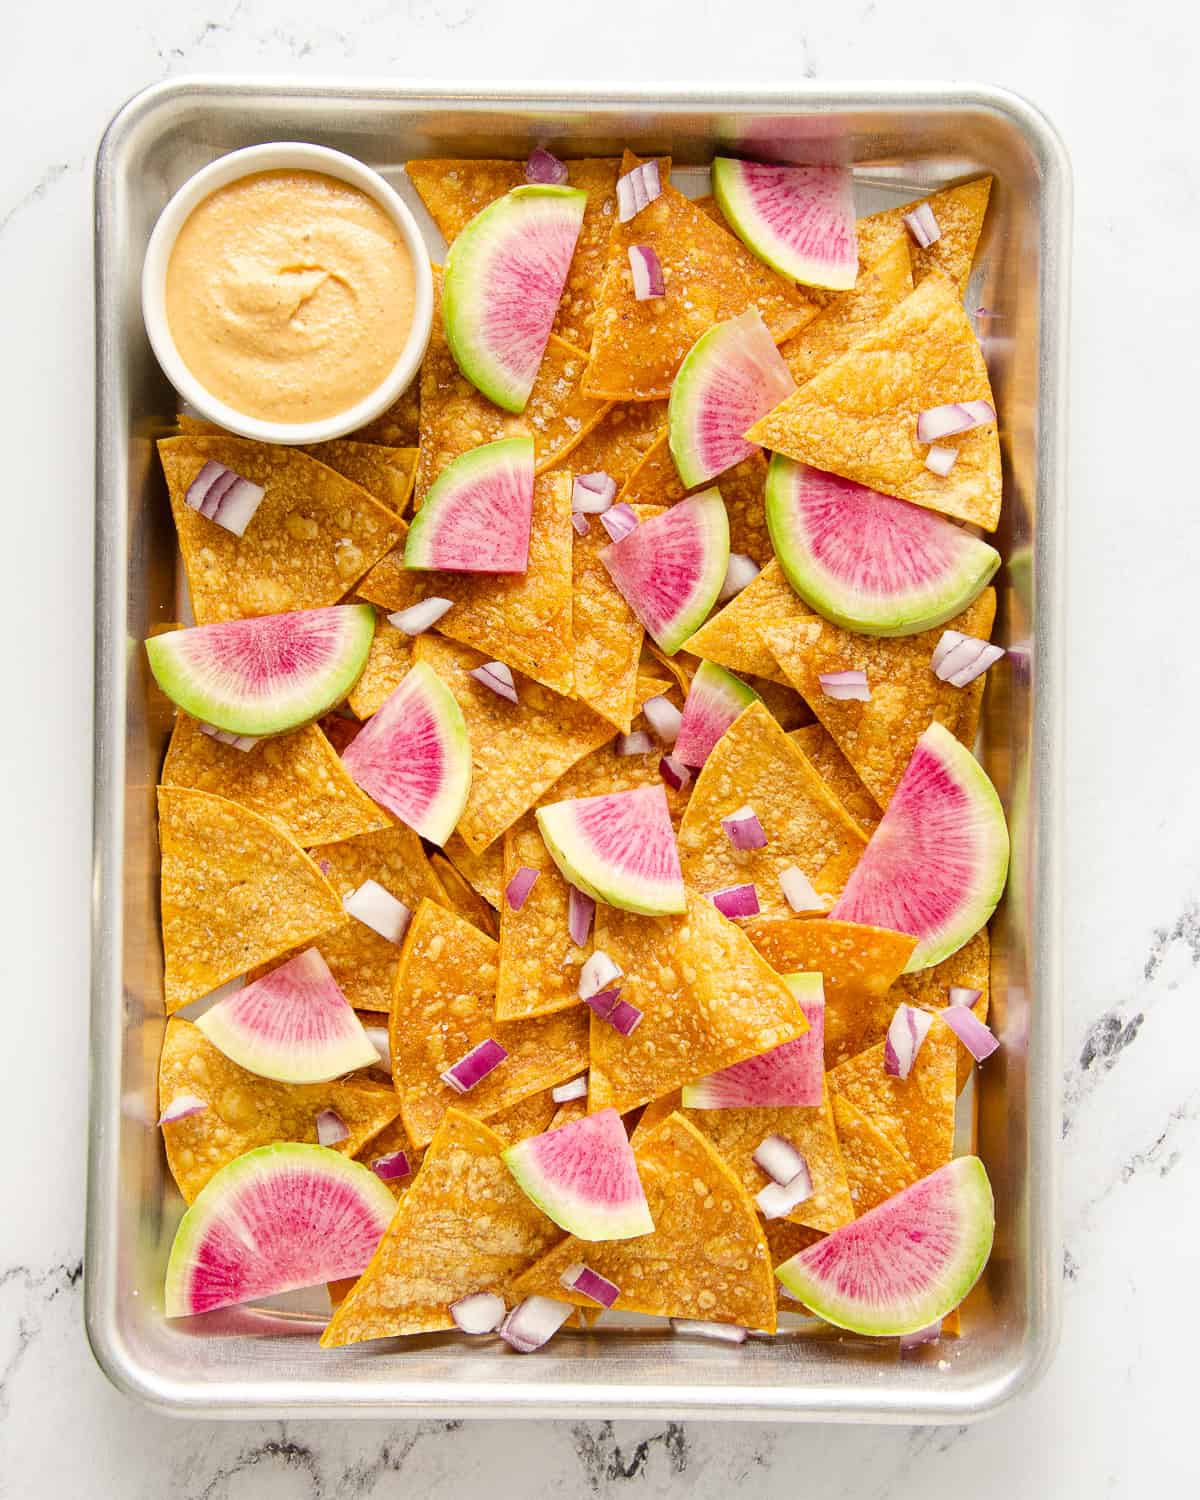 Baking tray with tortilla chips topped with radishes and red onions.